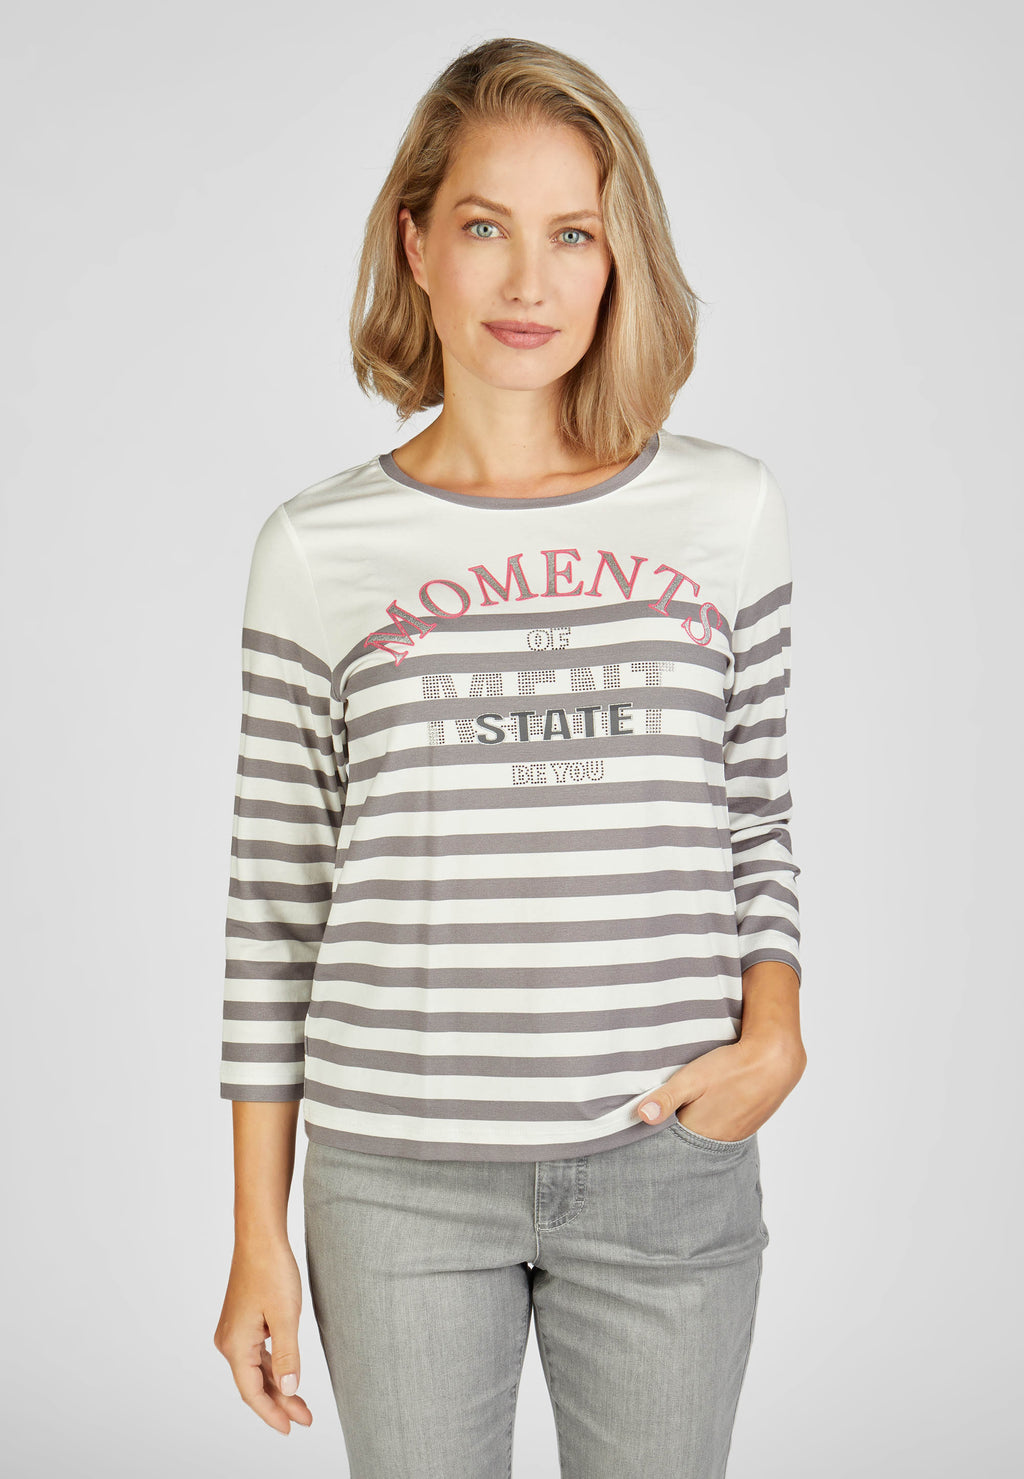 Rabe magnolia park collection striped top in grey and white, product code 52-113355